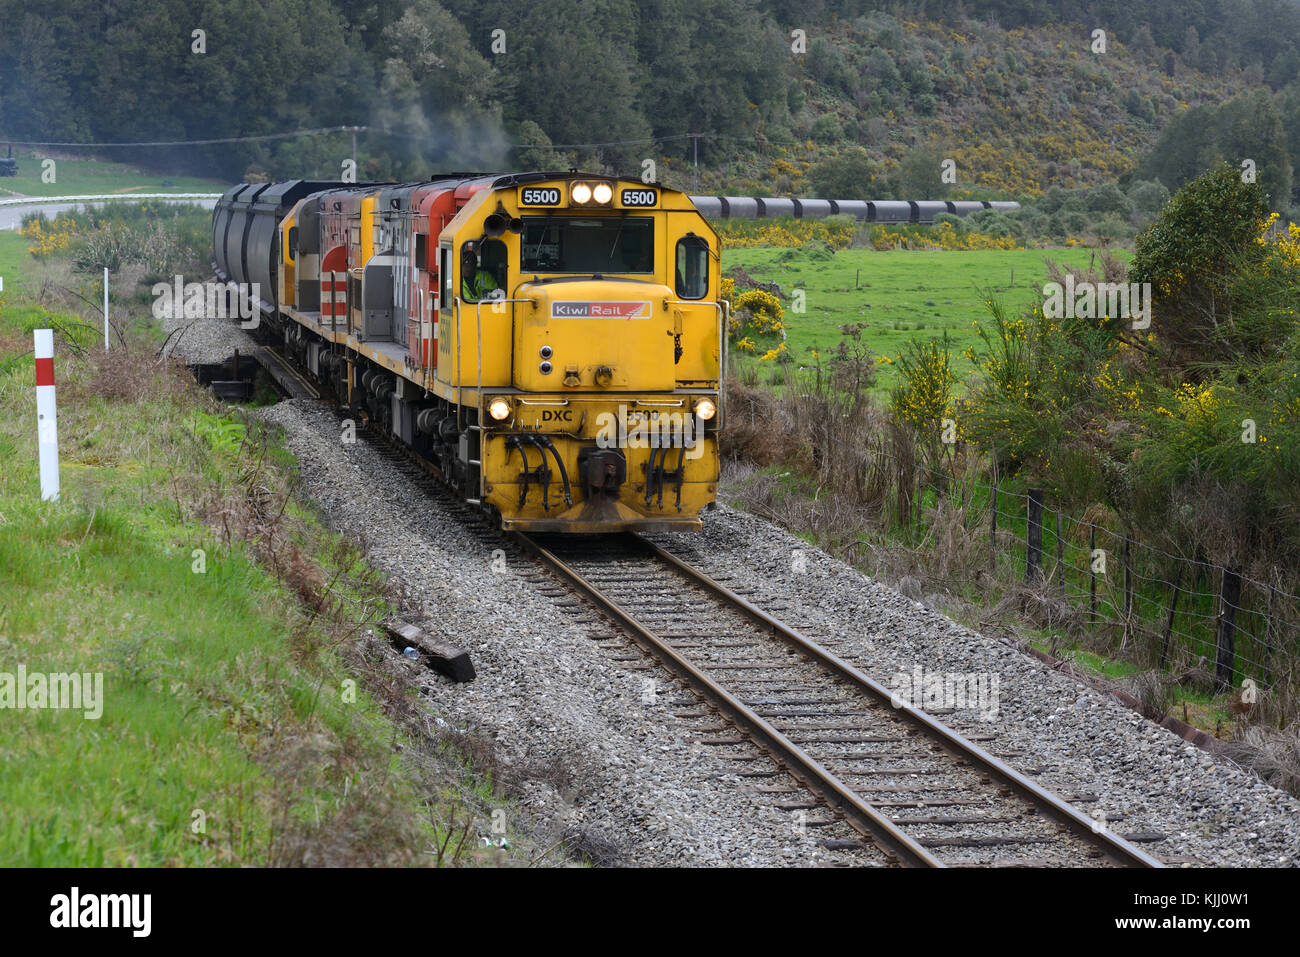 NGAHERE, NEW ZEALAND, OCTOBER 5, 2016: A train carries empty wagons to the Stockton open cast coal mine, Westland, New Zealand Stock Photo